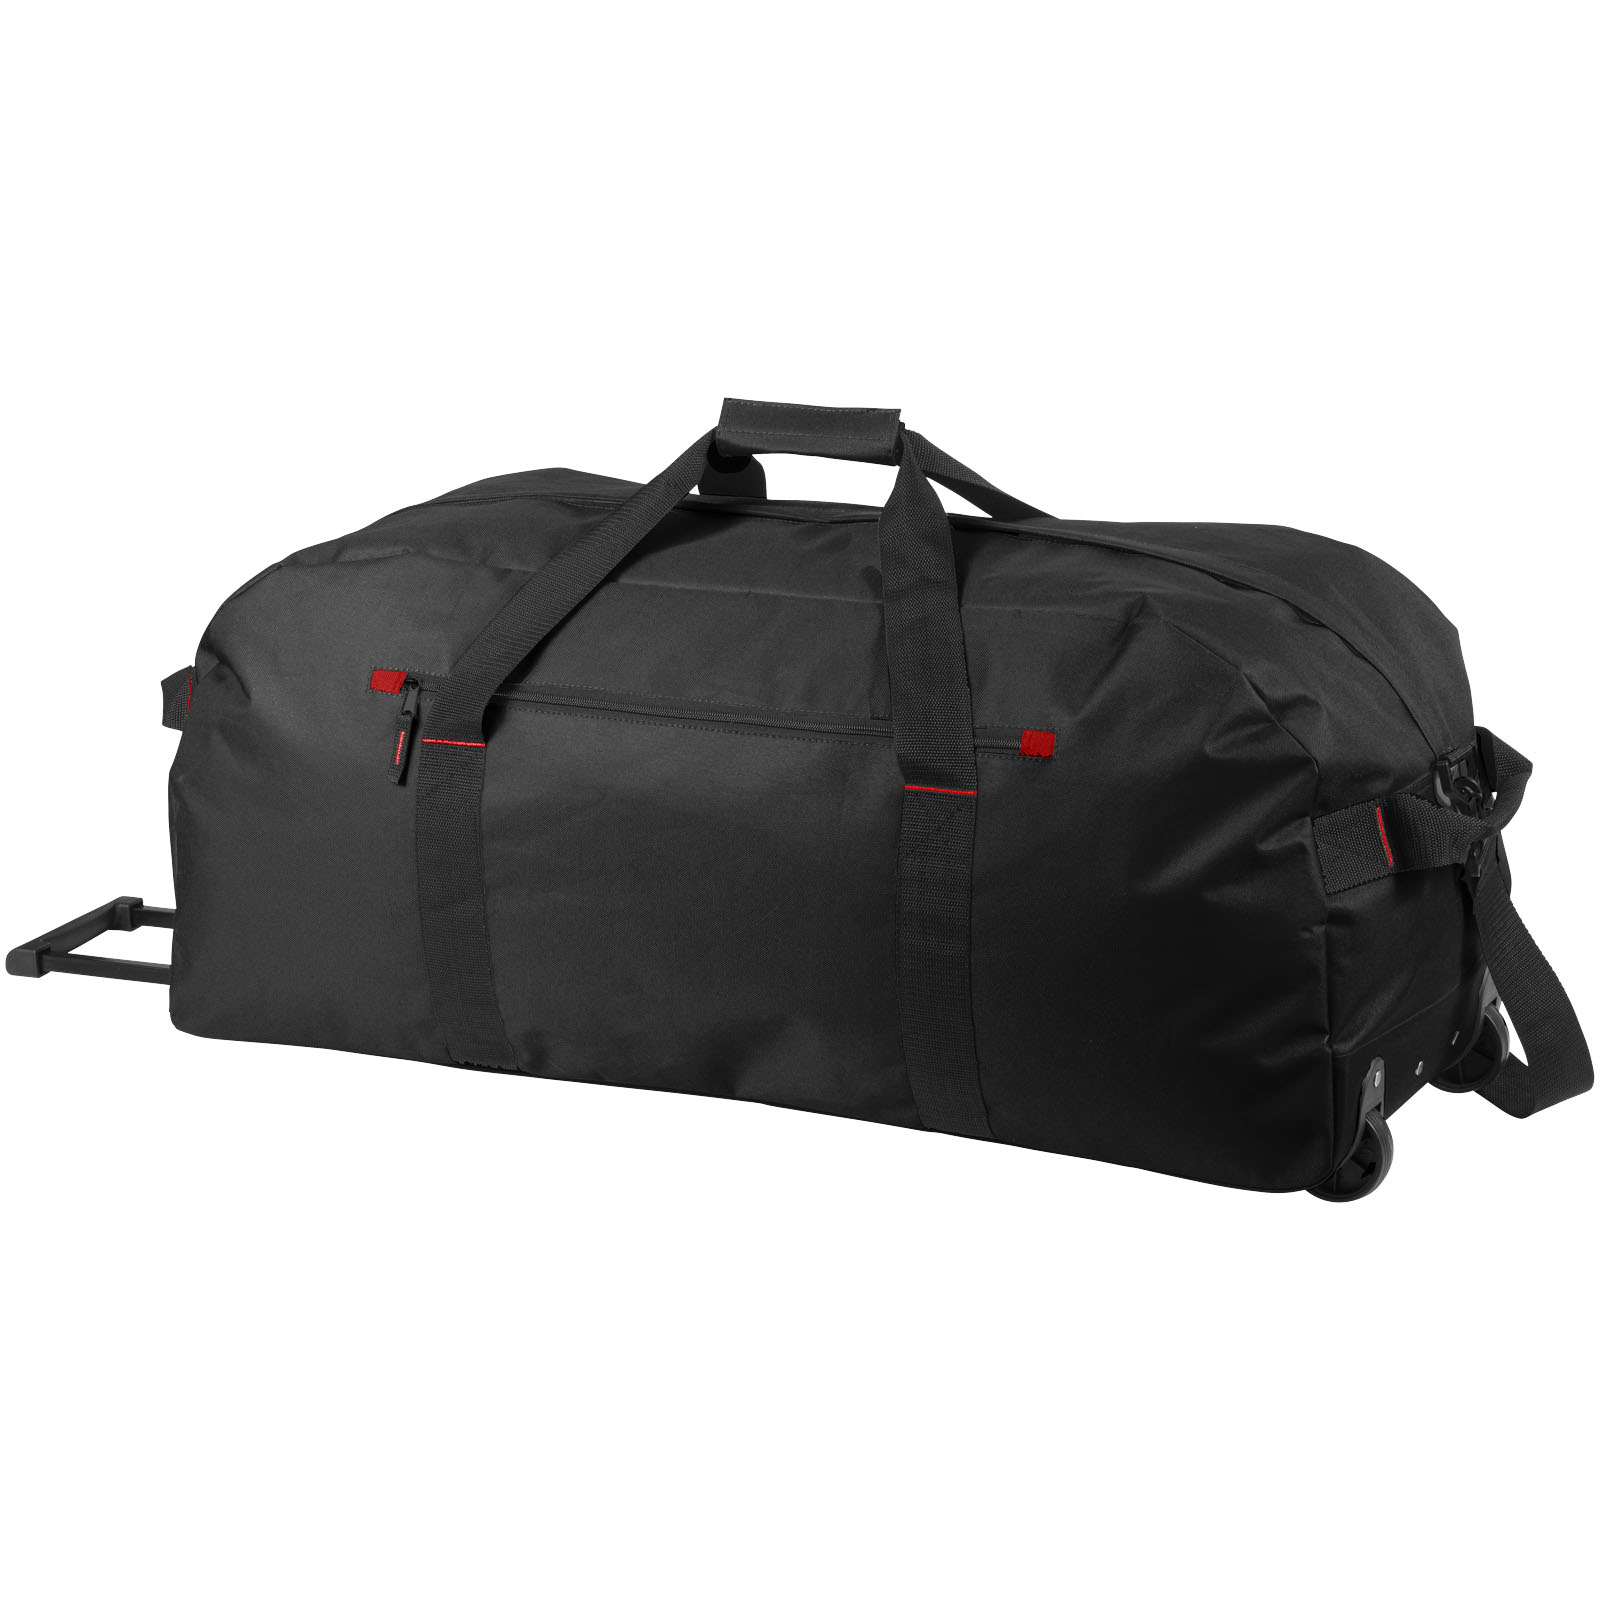 Trolleys & Suitcases - Vancouver trolley travel bag 75L